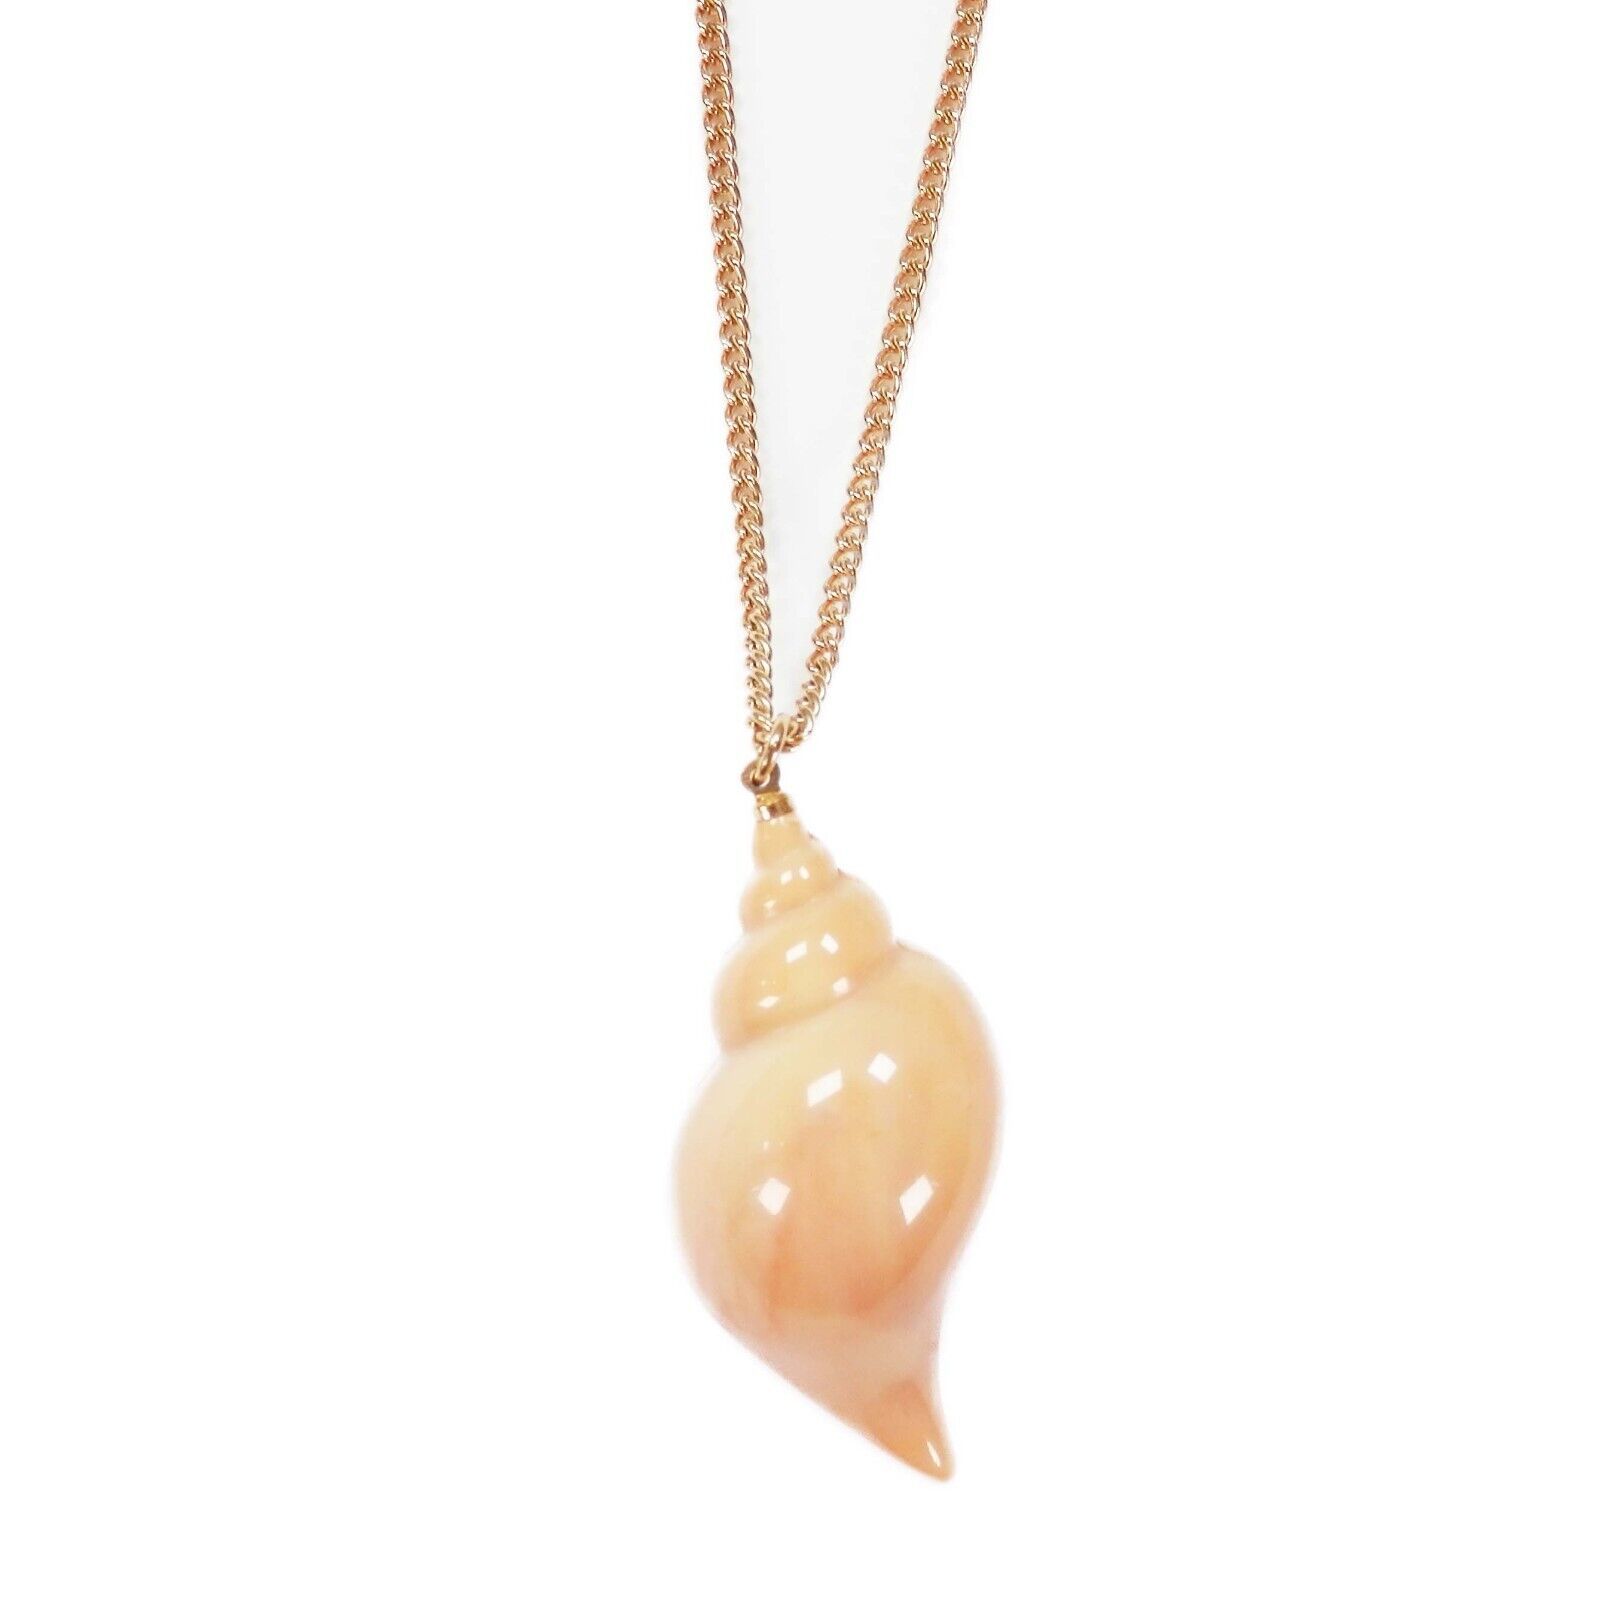 Primary image for Vintage Avon Large Faux Conch Seashell Pendant Necklace Peach Swirl Beach Ocean